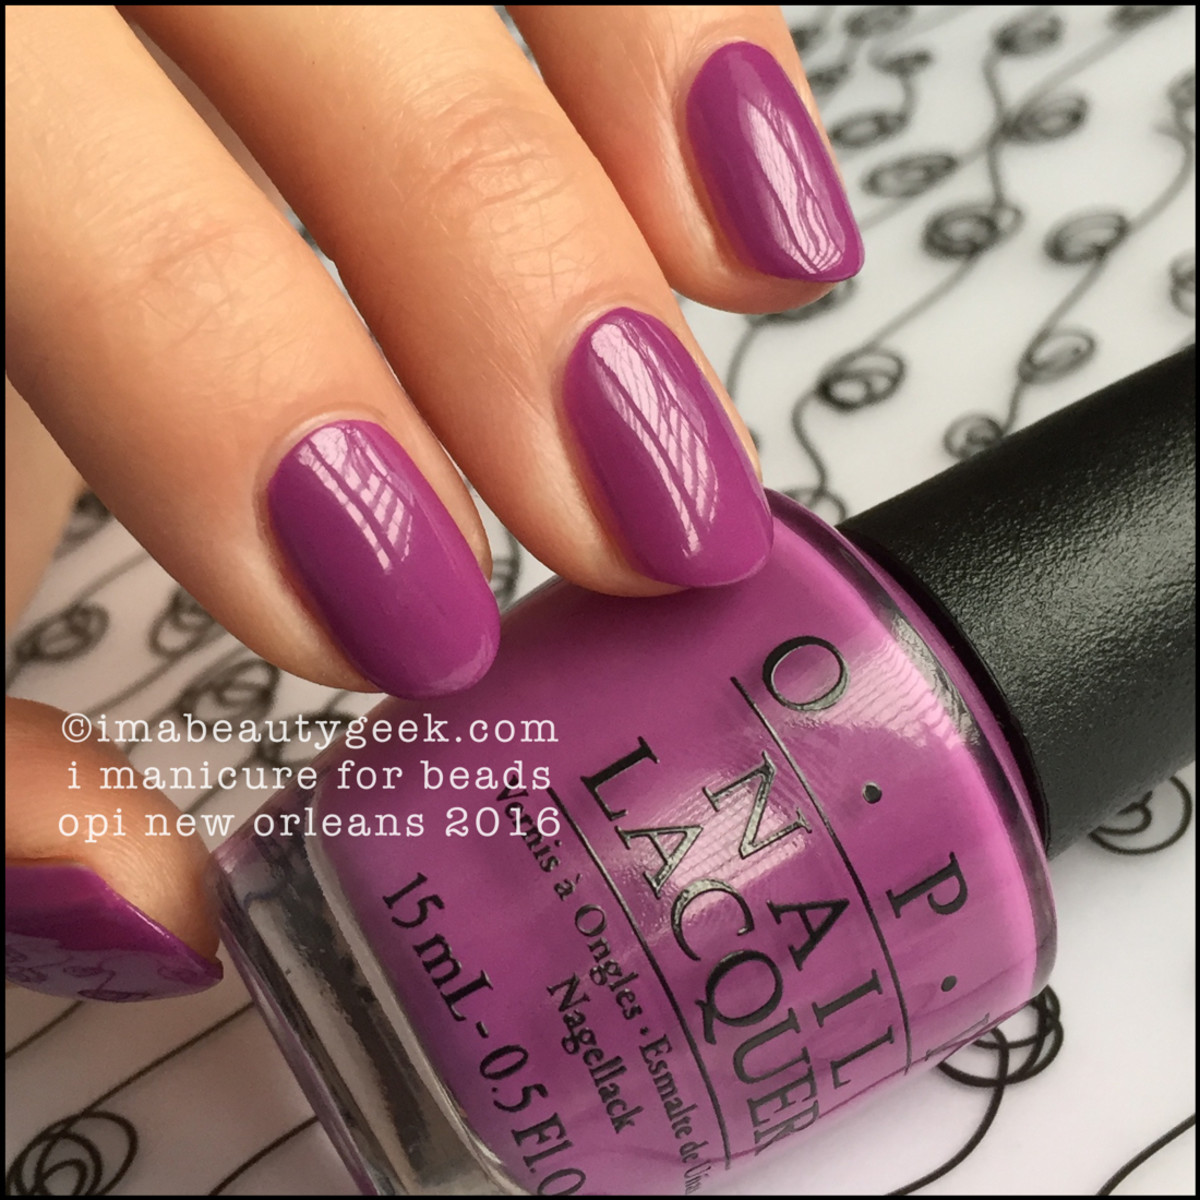 OPI I Manicure For Beads_OPI New Orleans Swatches 2016